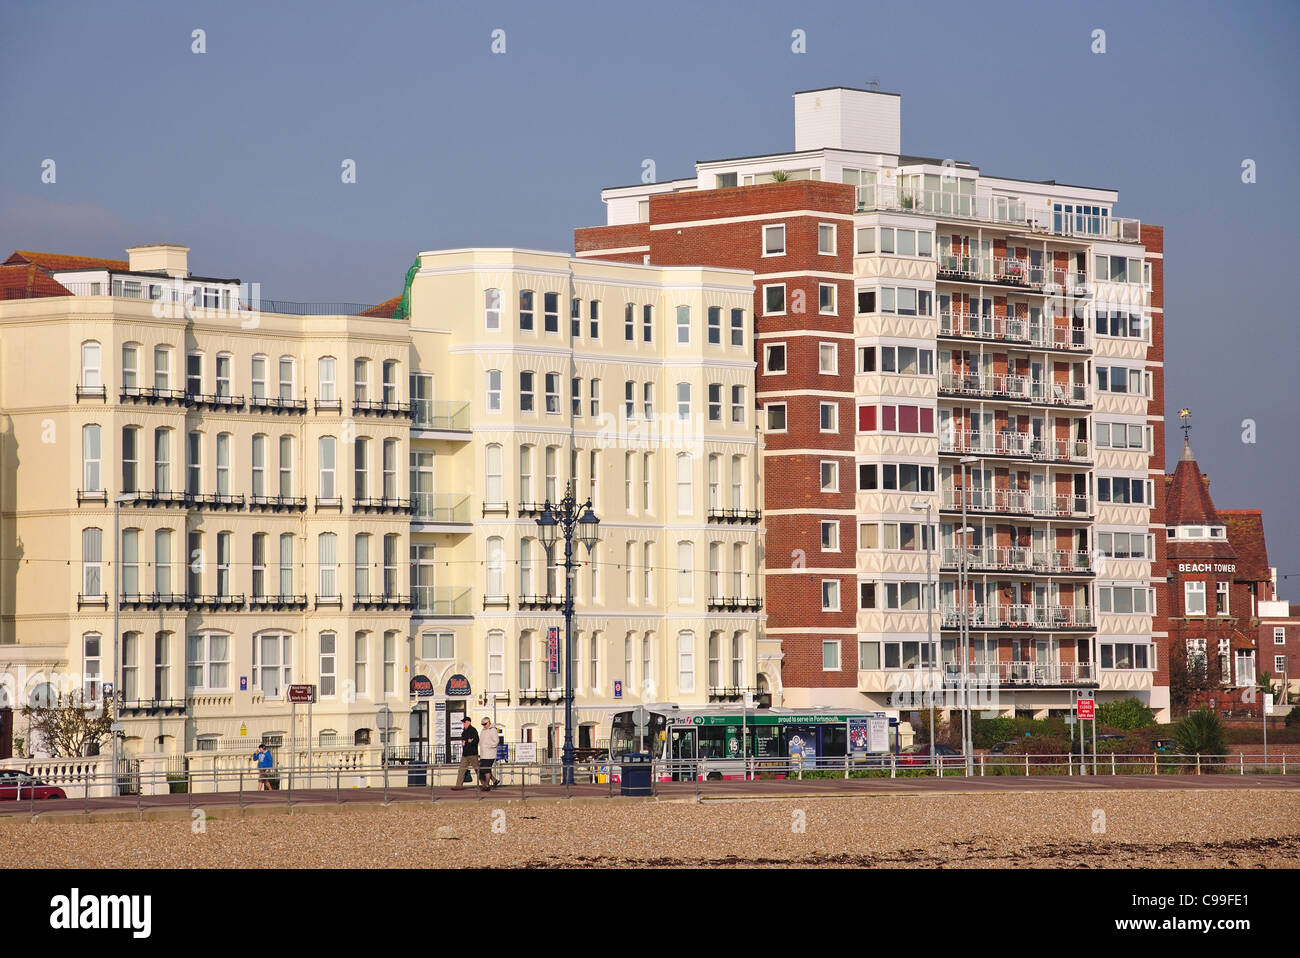 Promenade hotels from South Parade Pier, Southsea, Portsmouth, Hampshire, England, United Kingdom Stock Photo